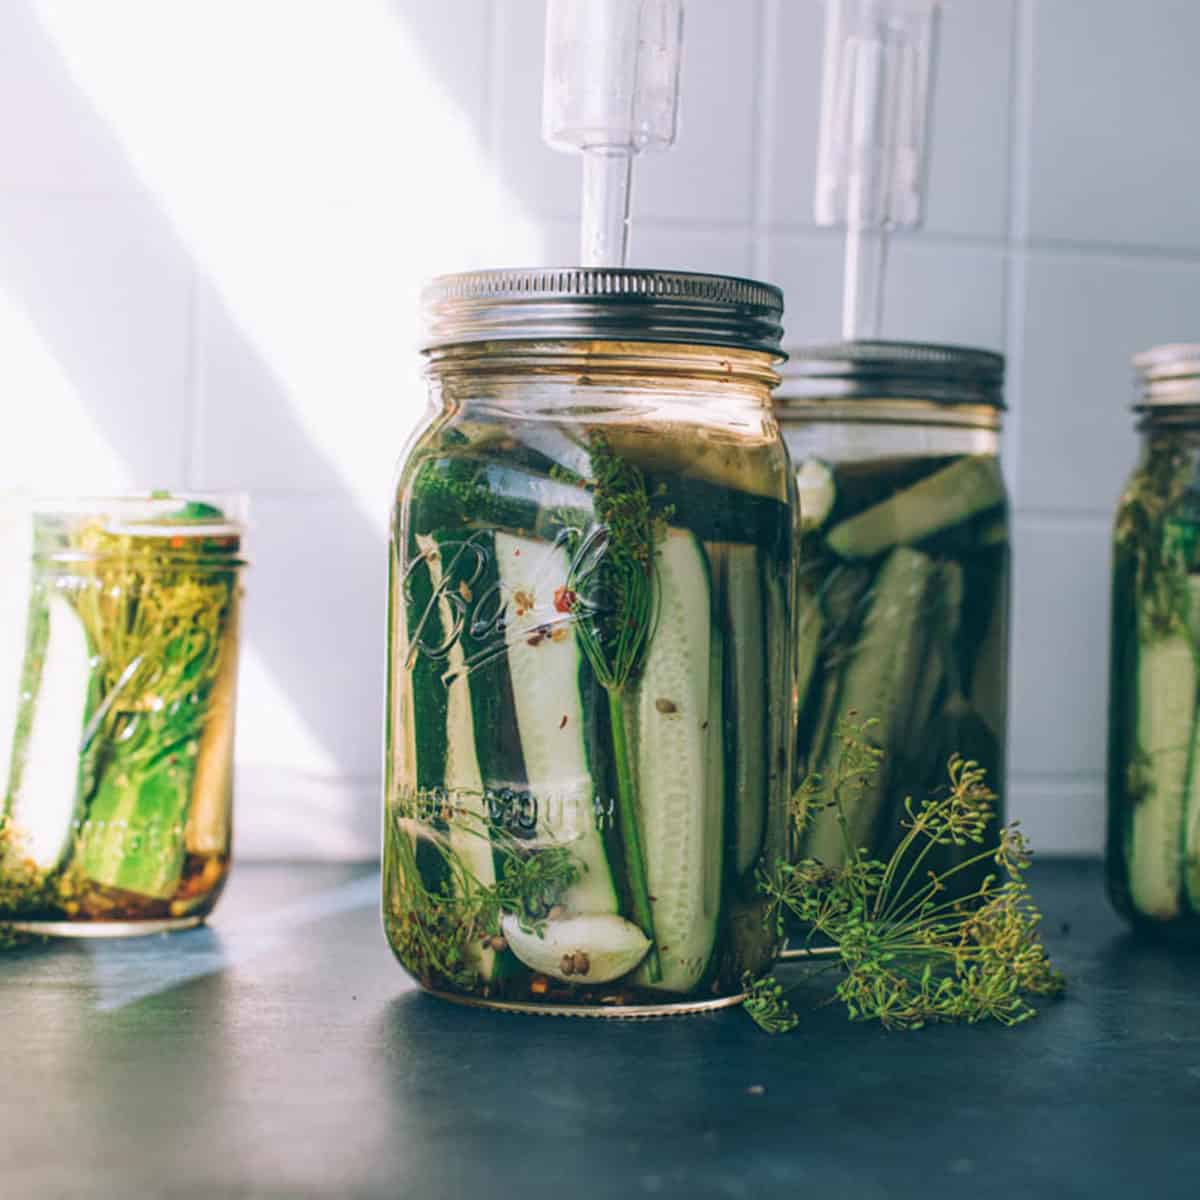 Pickling cucumbers fermenting in jars with airlock lids.